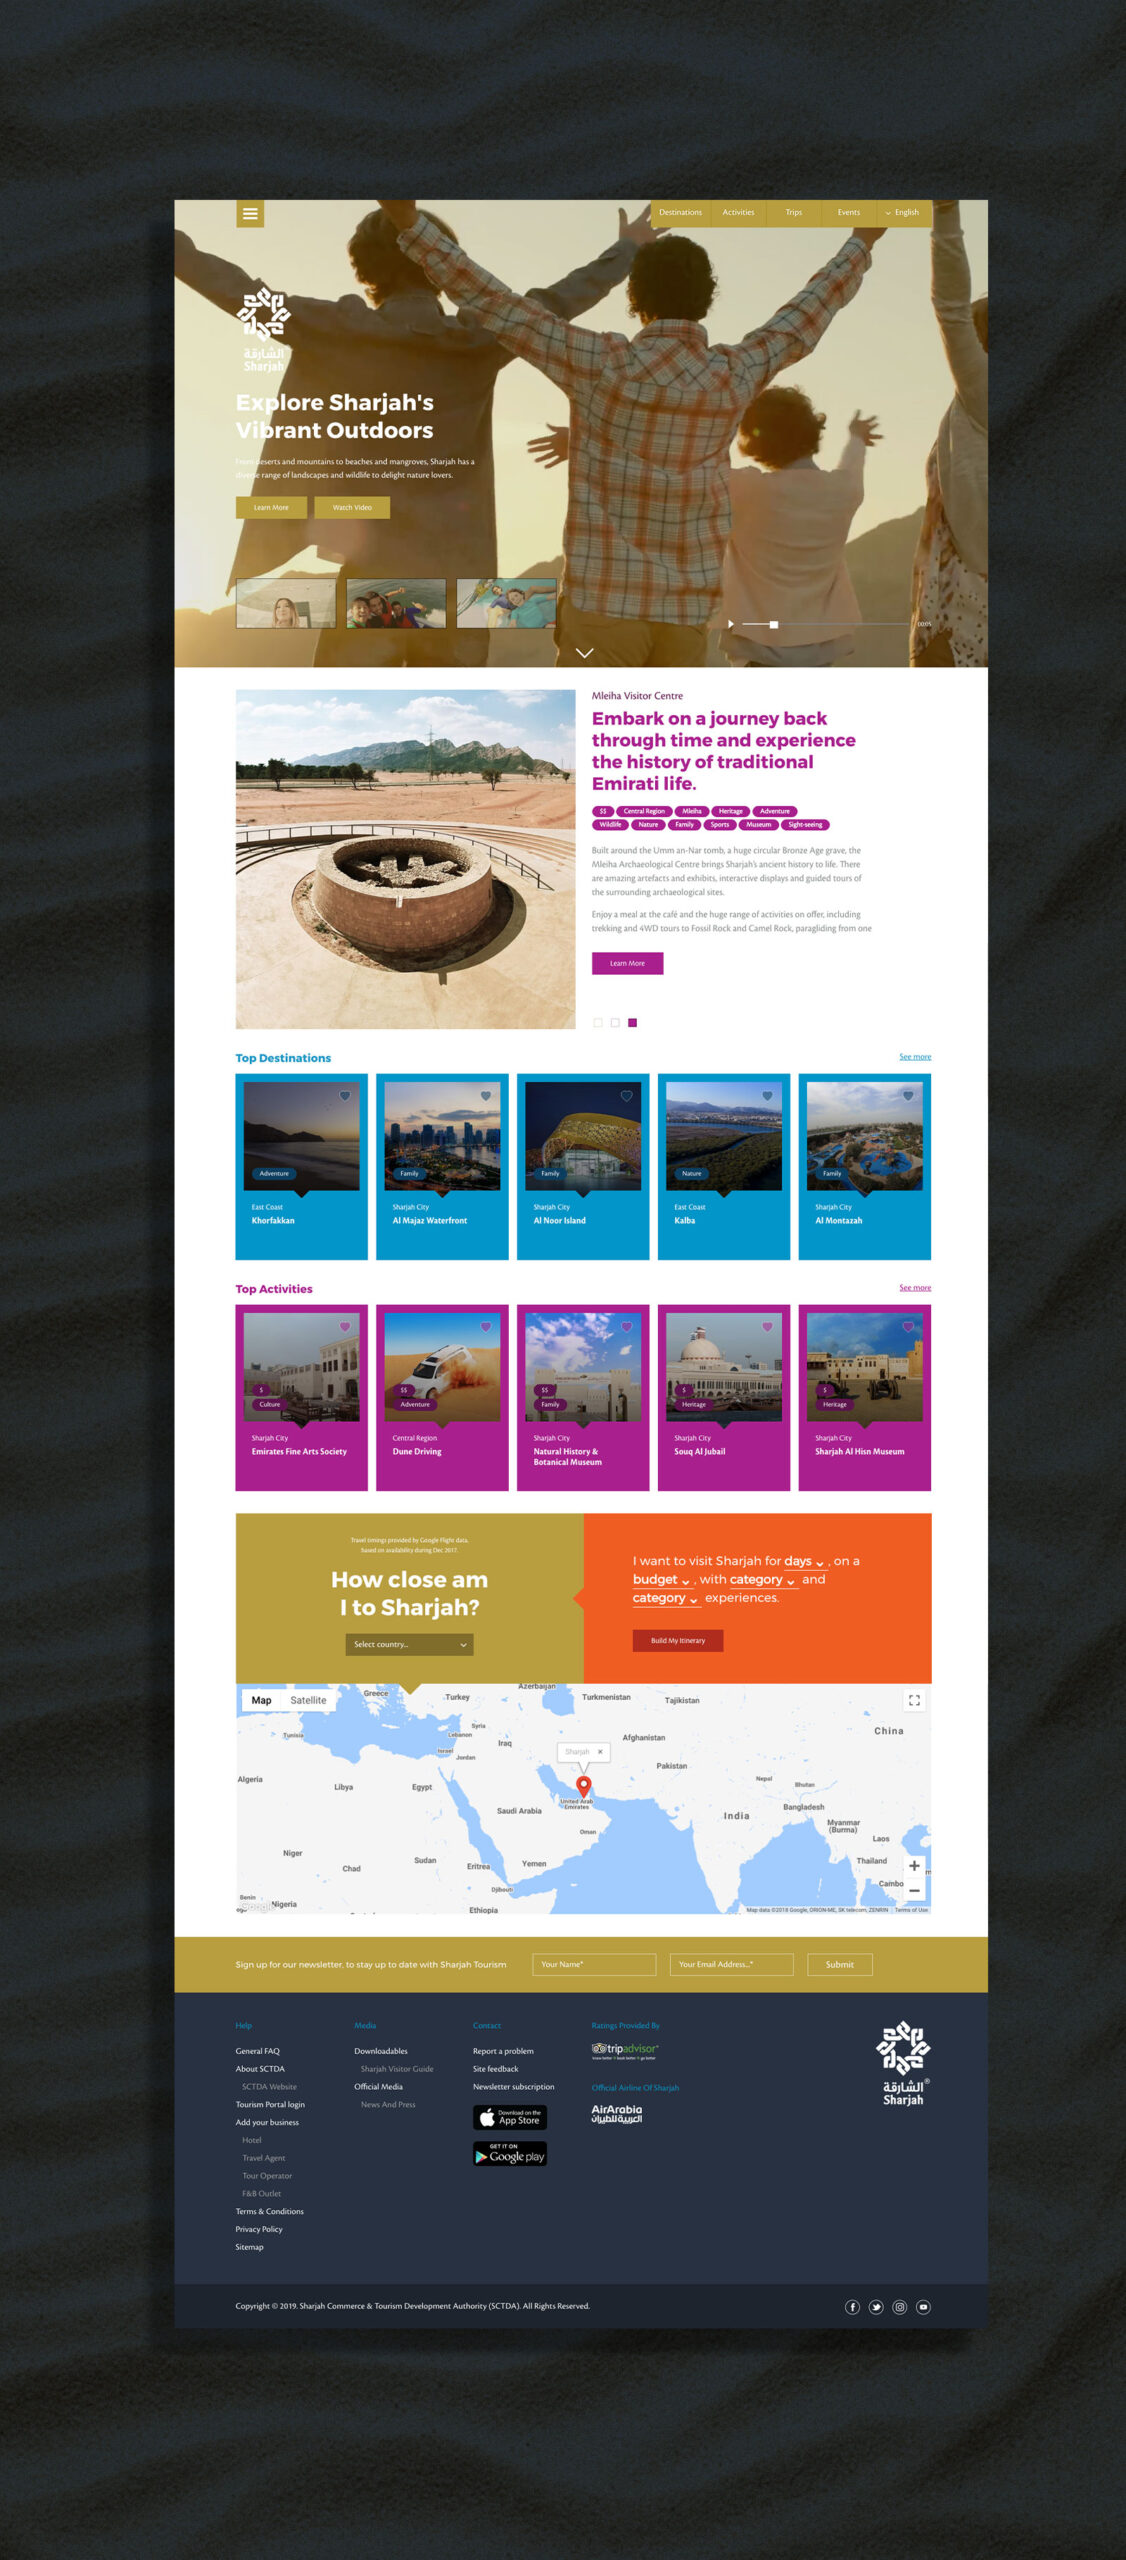 The landing page of the website developed for The Sharjah Commerce and Tourism Development Authority (SCTDA)